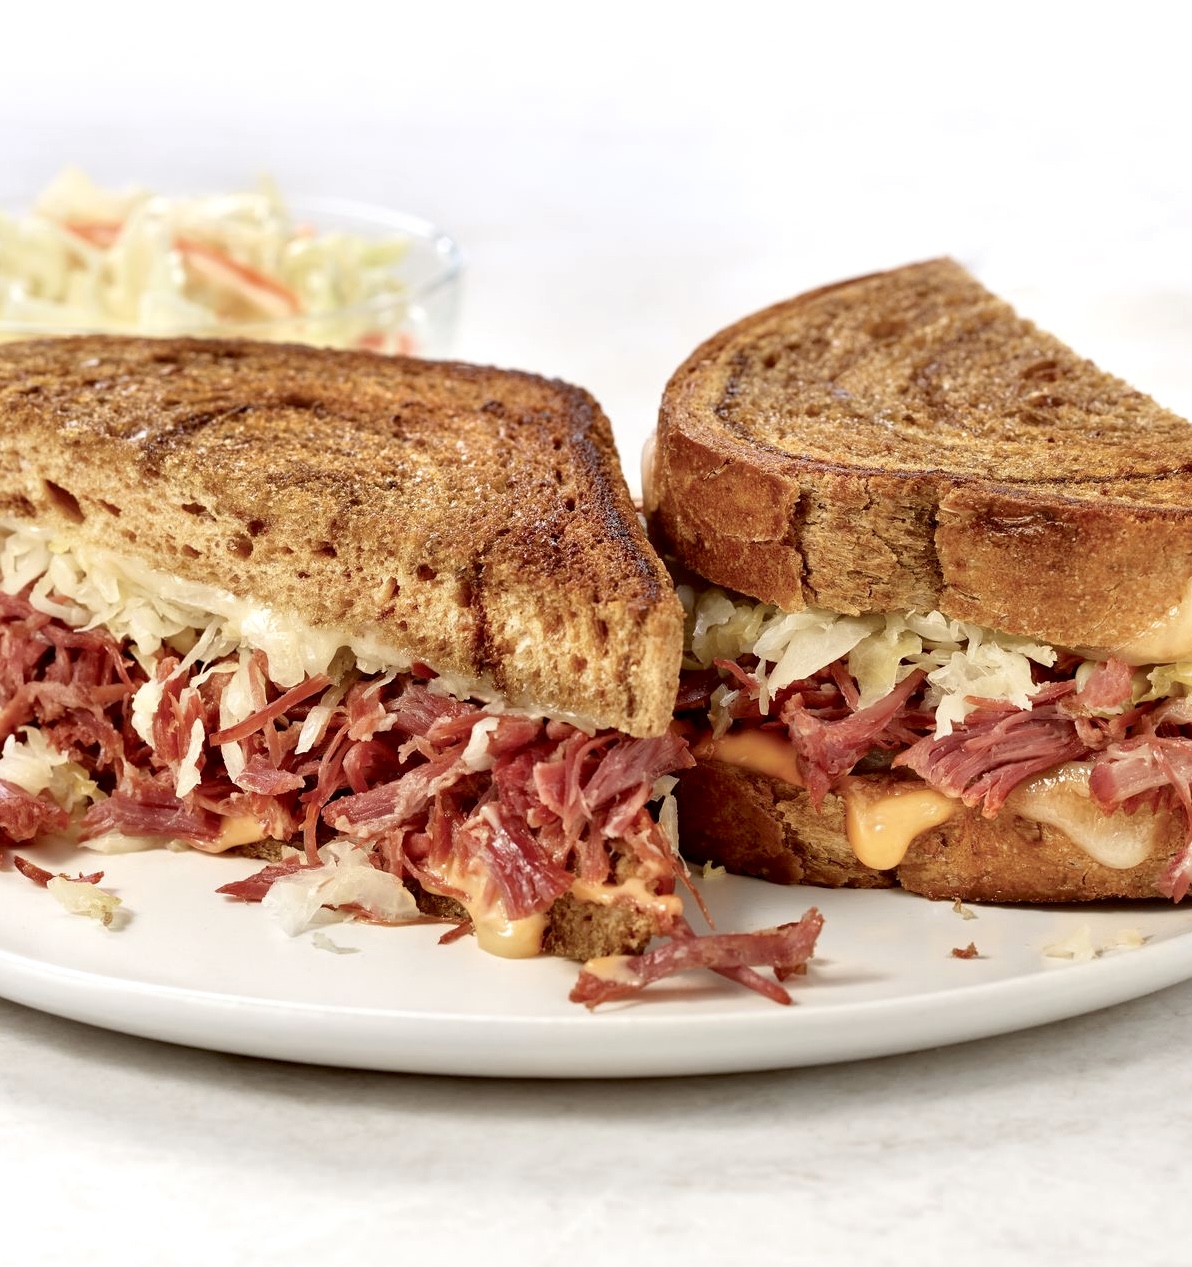 sandwich with cheese and shredded meat - Bakers Square's signature dishes